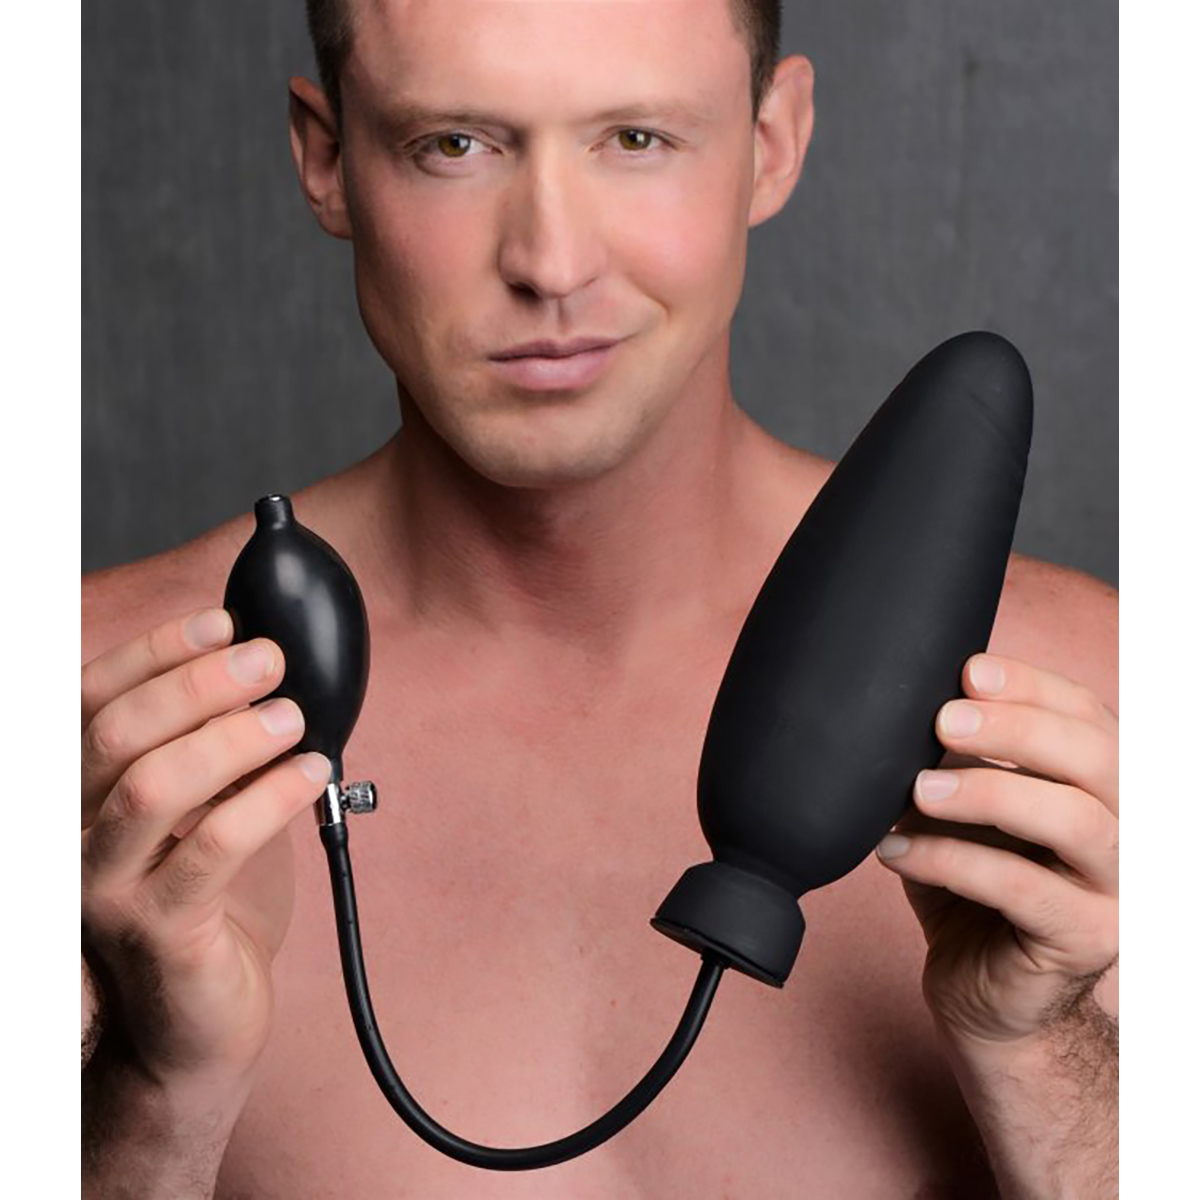 Dick-Spand-Inflatable-Silicone-Dildo-118-XR-AG554-6